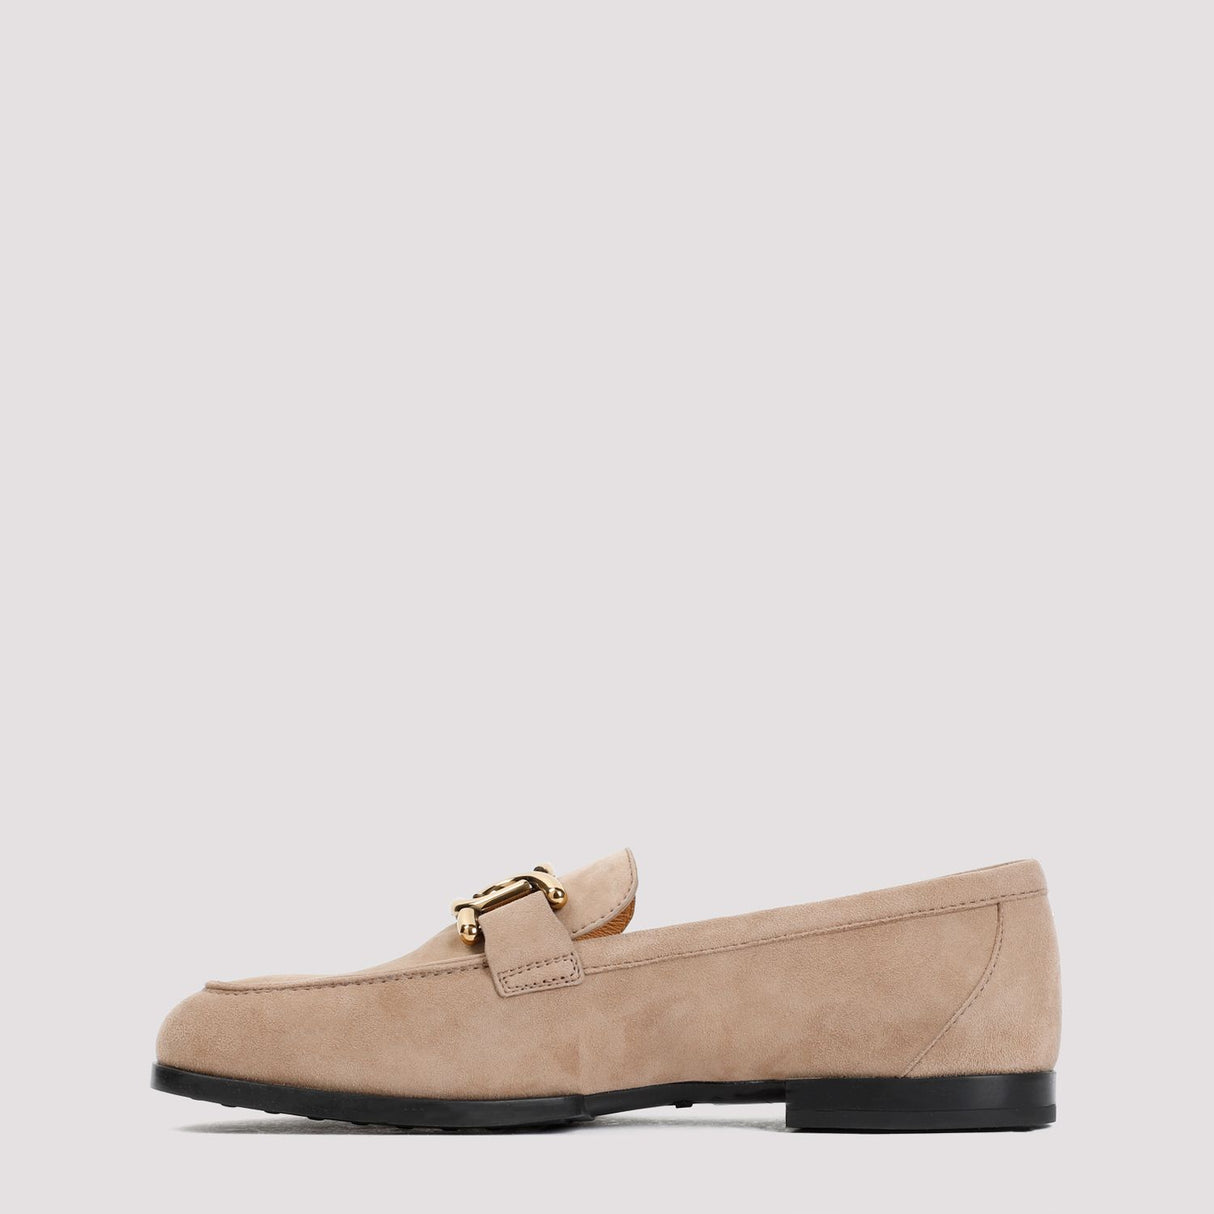 Nude & Neutral Suede Loafer for Women